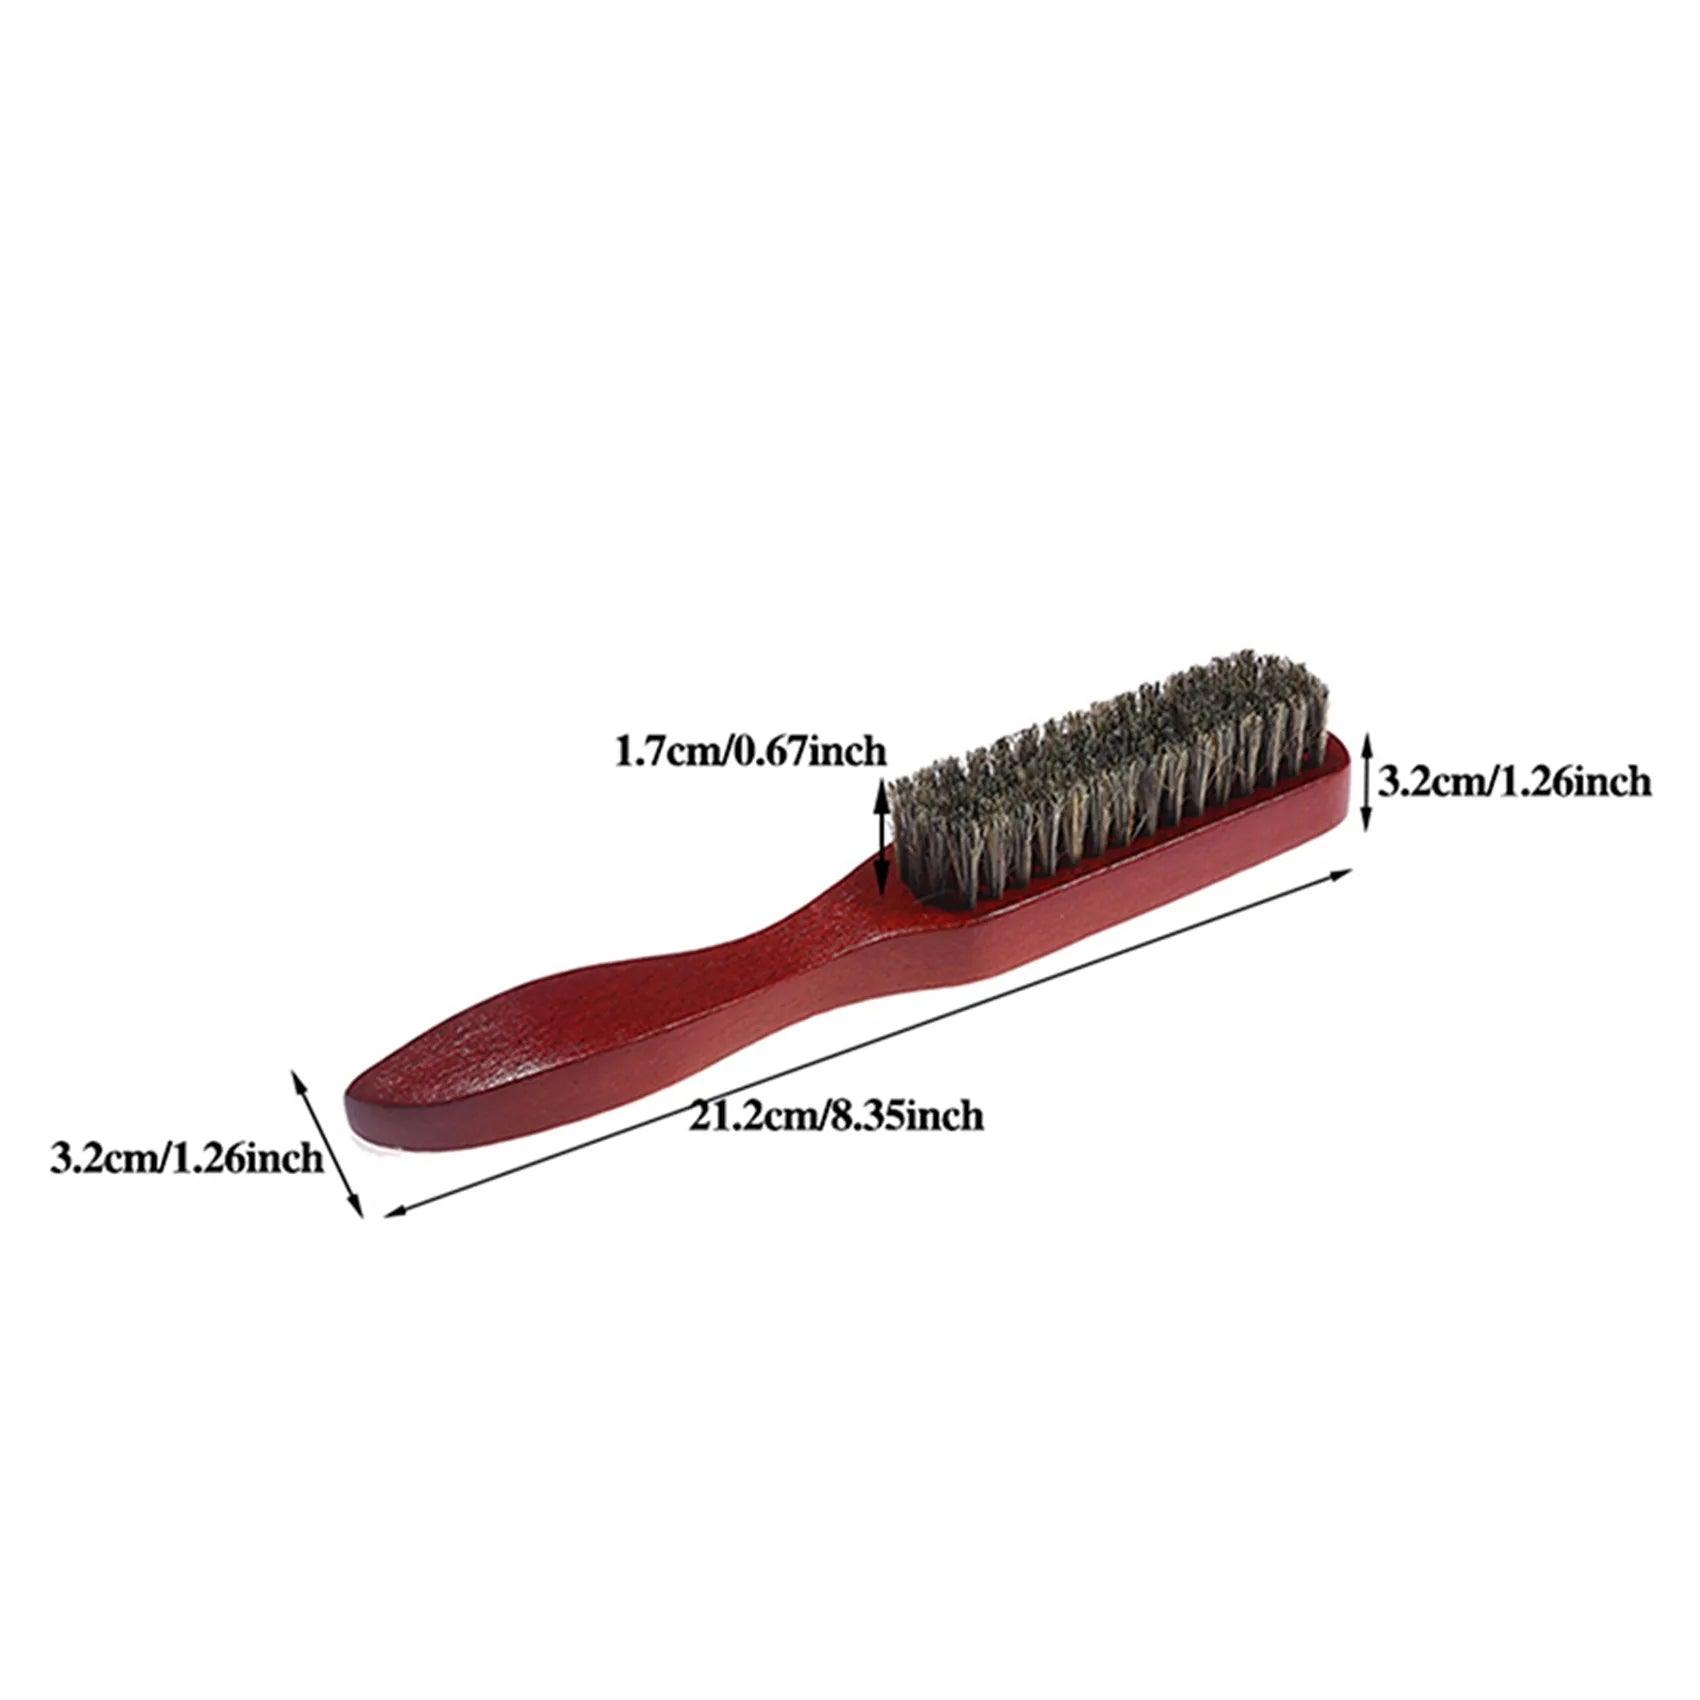 Professional Teasing Brush with Boar Bristle Comb - Hairdressing DIY